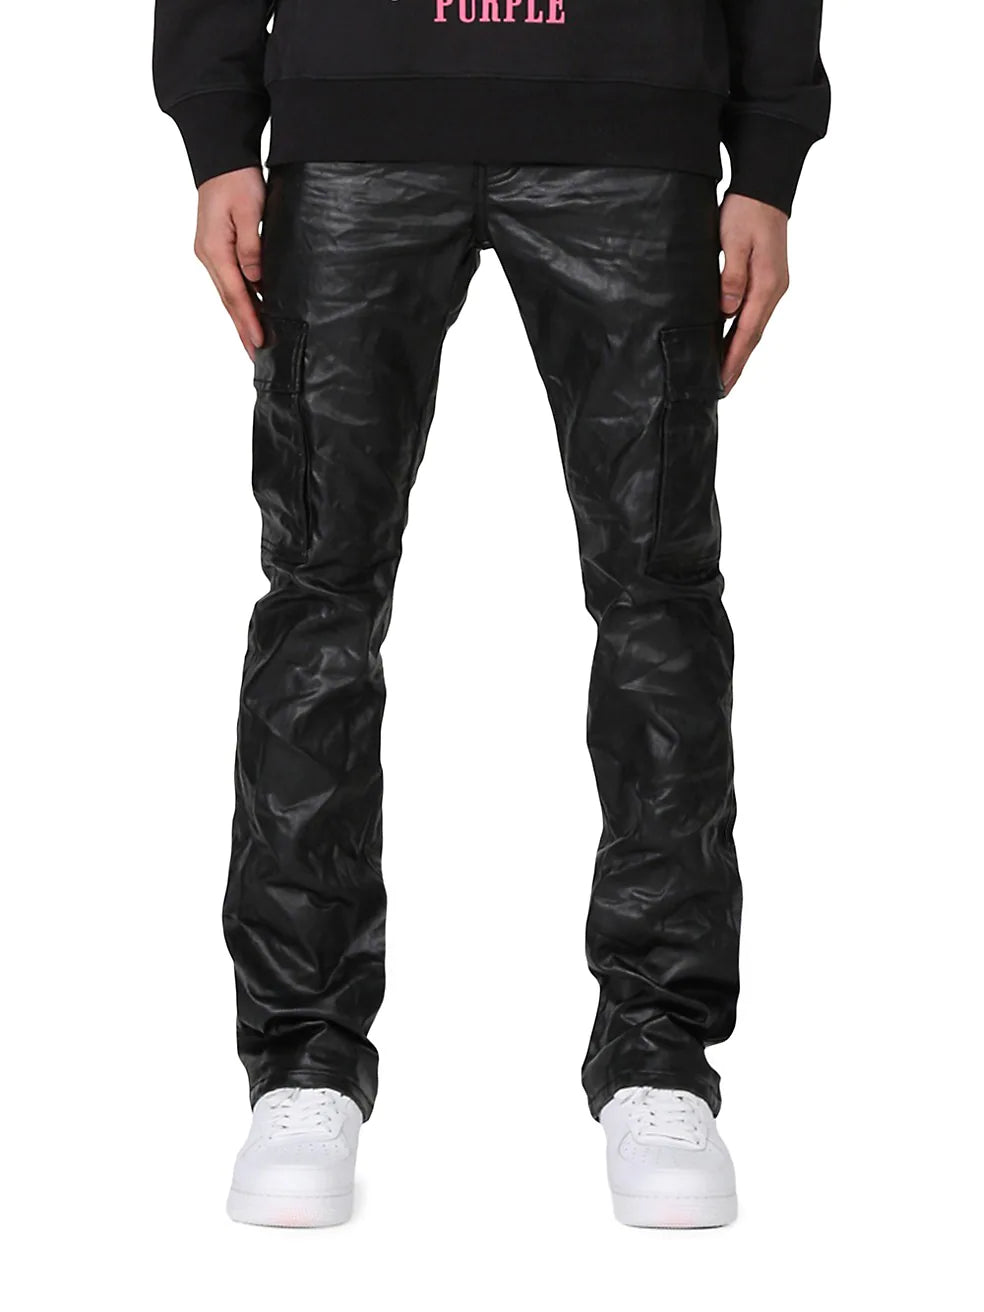 PURPLE BRAND CRINKLED FAUX LEATHER CARGO PANTS FOR RENT